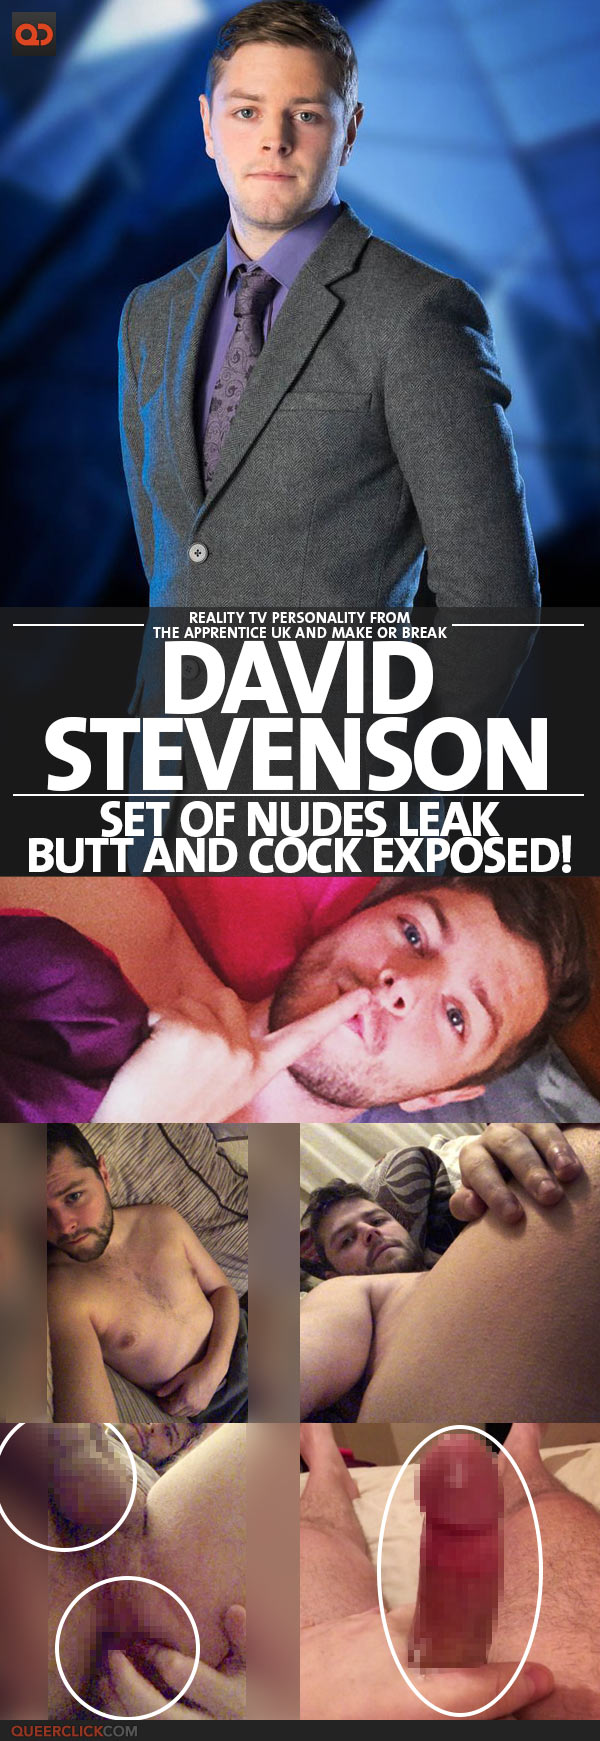 David Stevenson, Reality TV Personality From The Apprentice UK And Make Or Break, Set Of Nudes Leak - Butt And Cock Exposed!